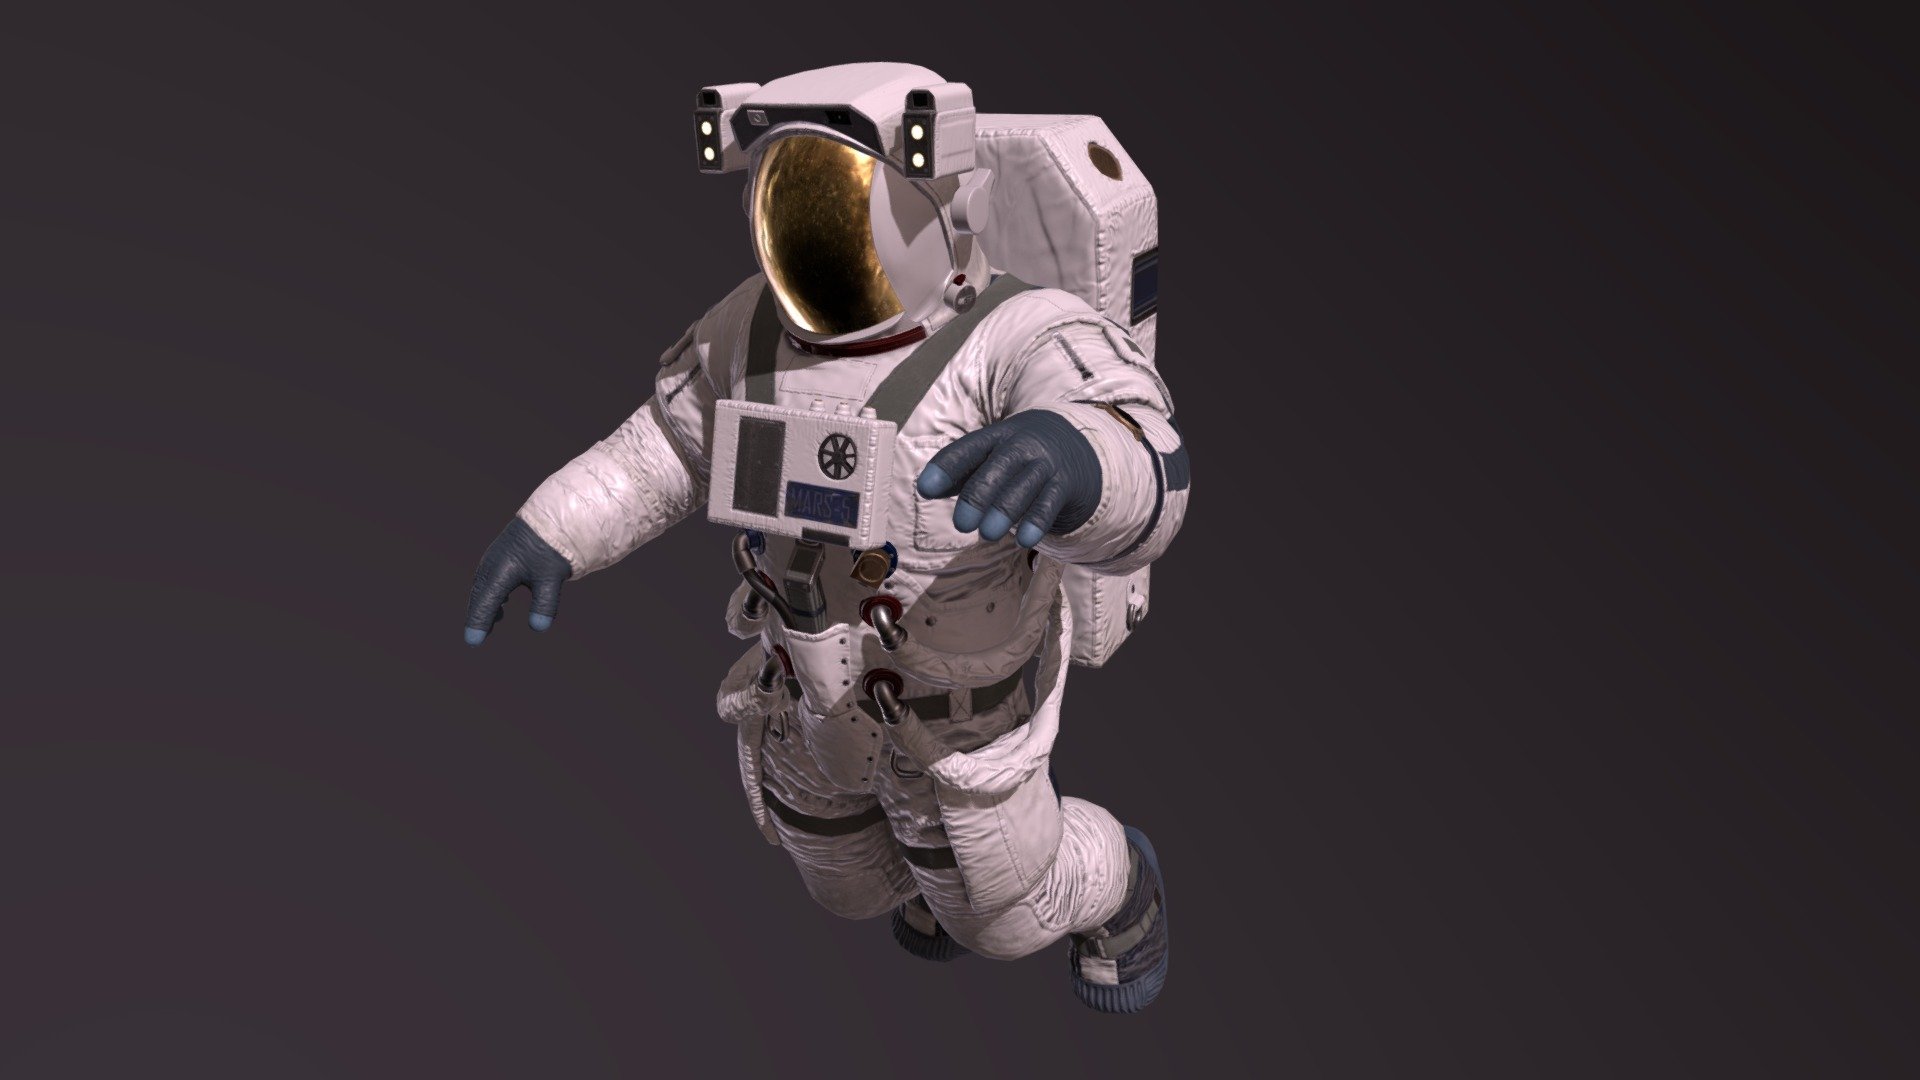 Hello,
I present to you the character of an astronaut 3d model